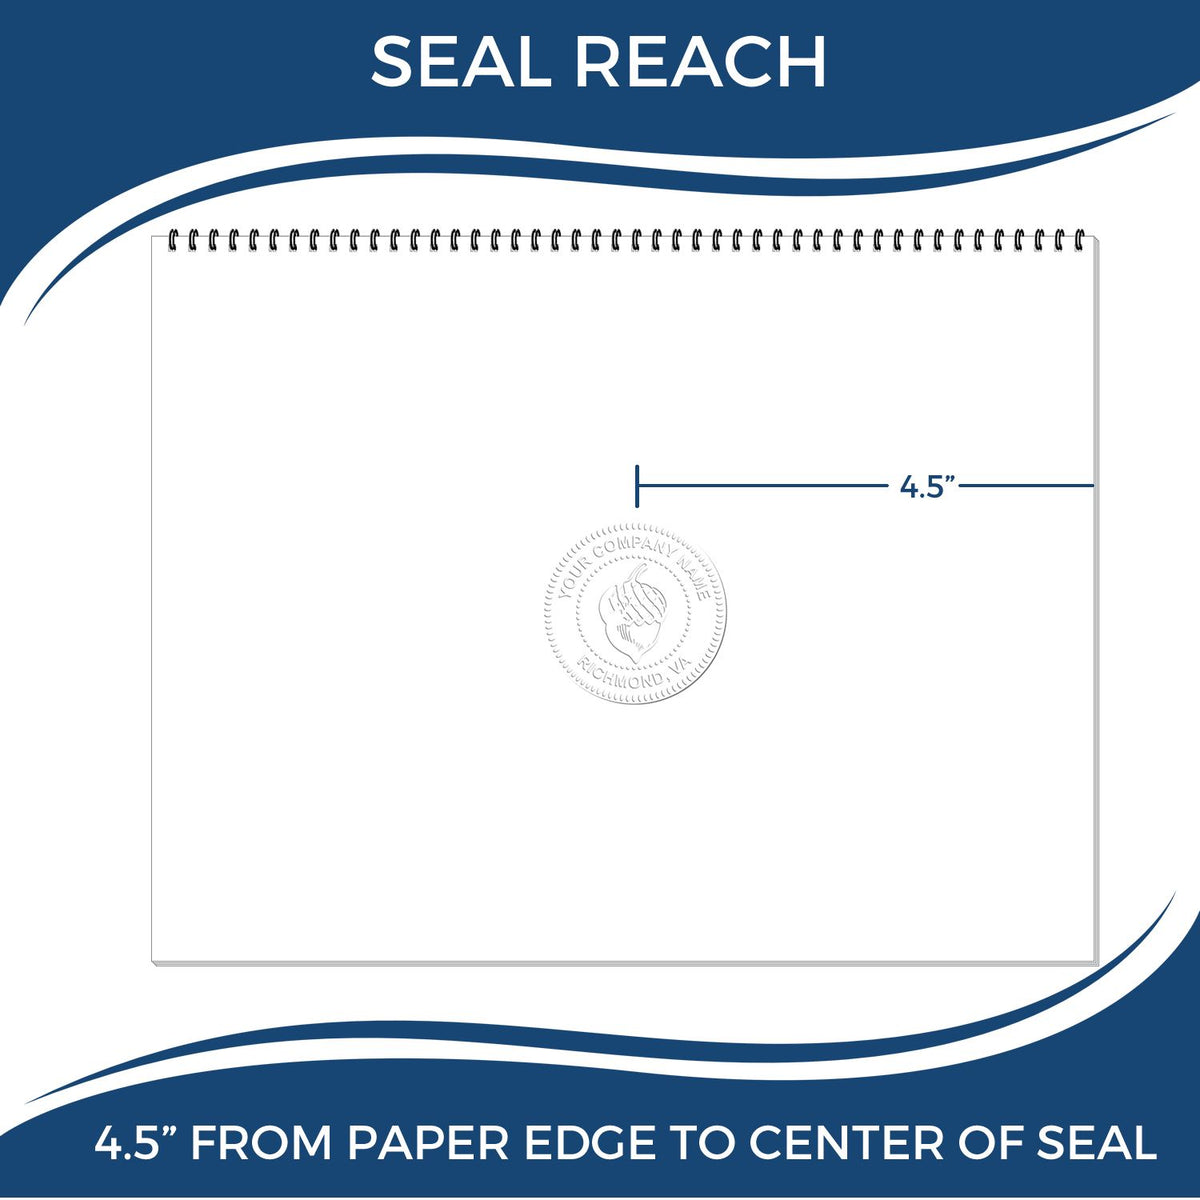 An infographic showing the seal reach which is represented by a ruler and a miniature seal image of the State of Montana Extended Long Reach Geologist Seal